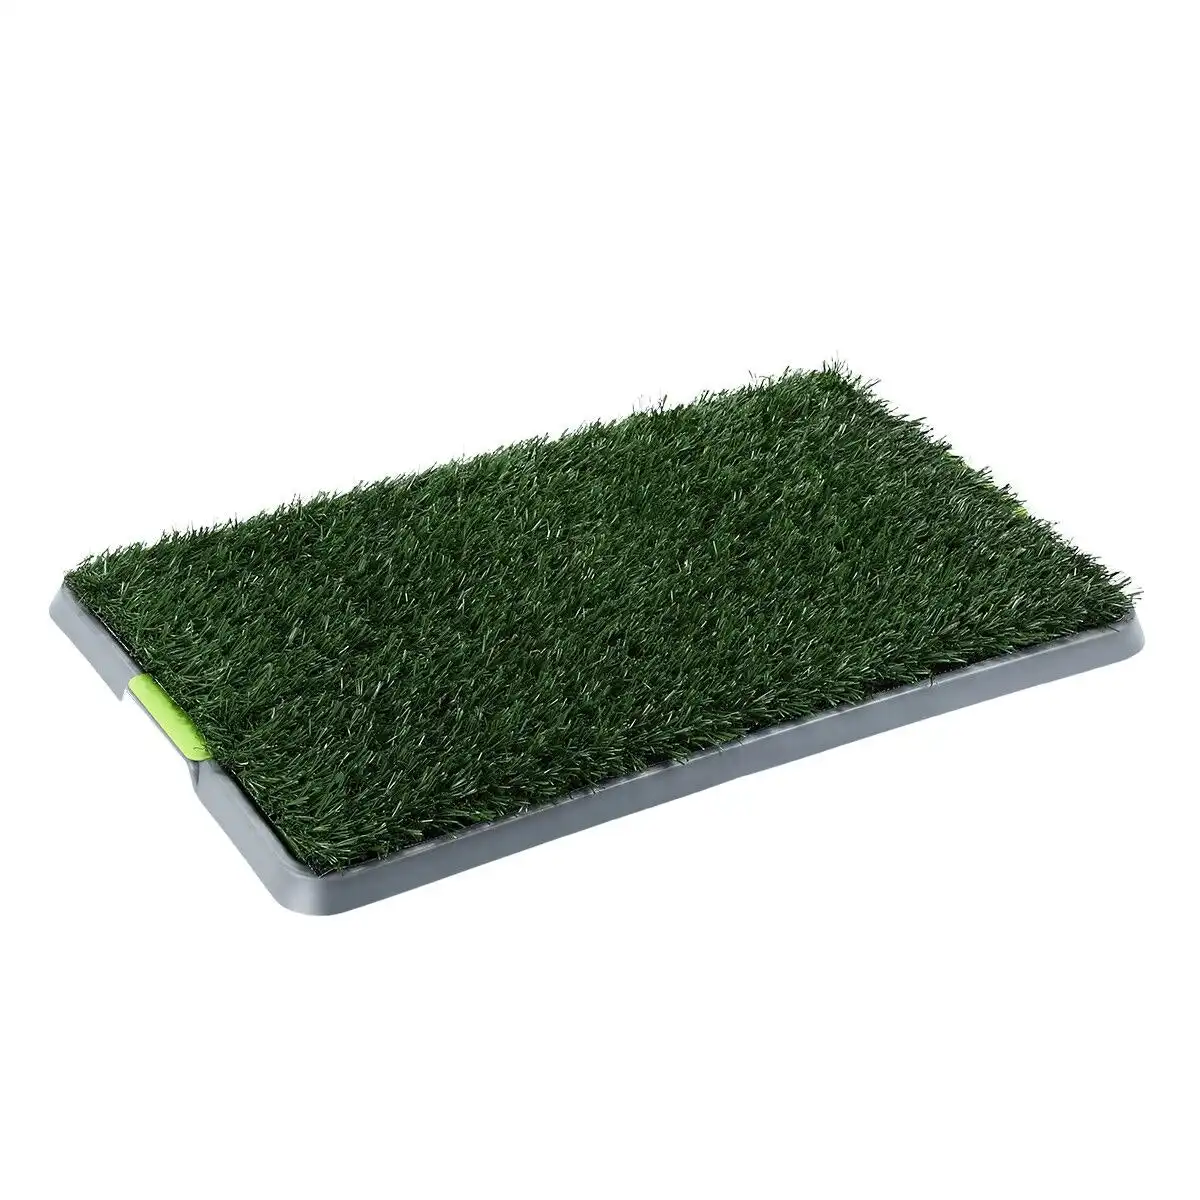 PaWise Pet Dog Grass Toilet Pee Pad Indoor Puppy Potty Training Mat Patch with Removable Tray